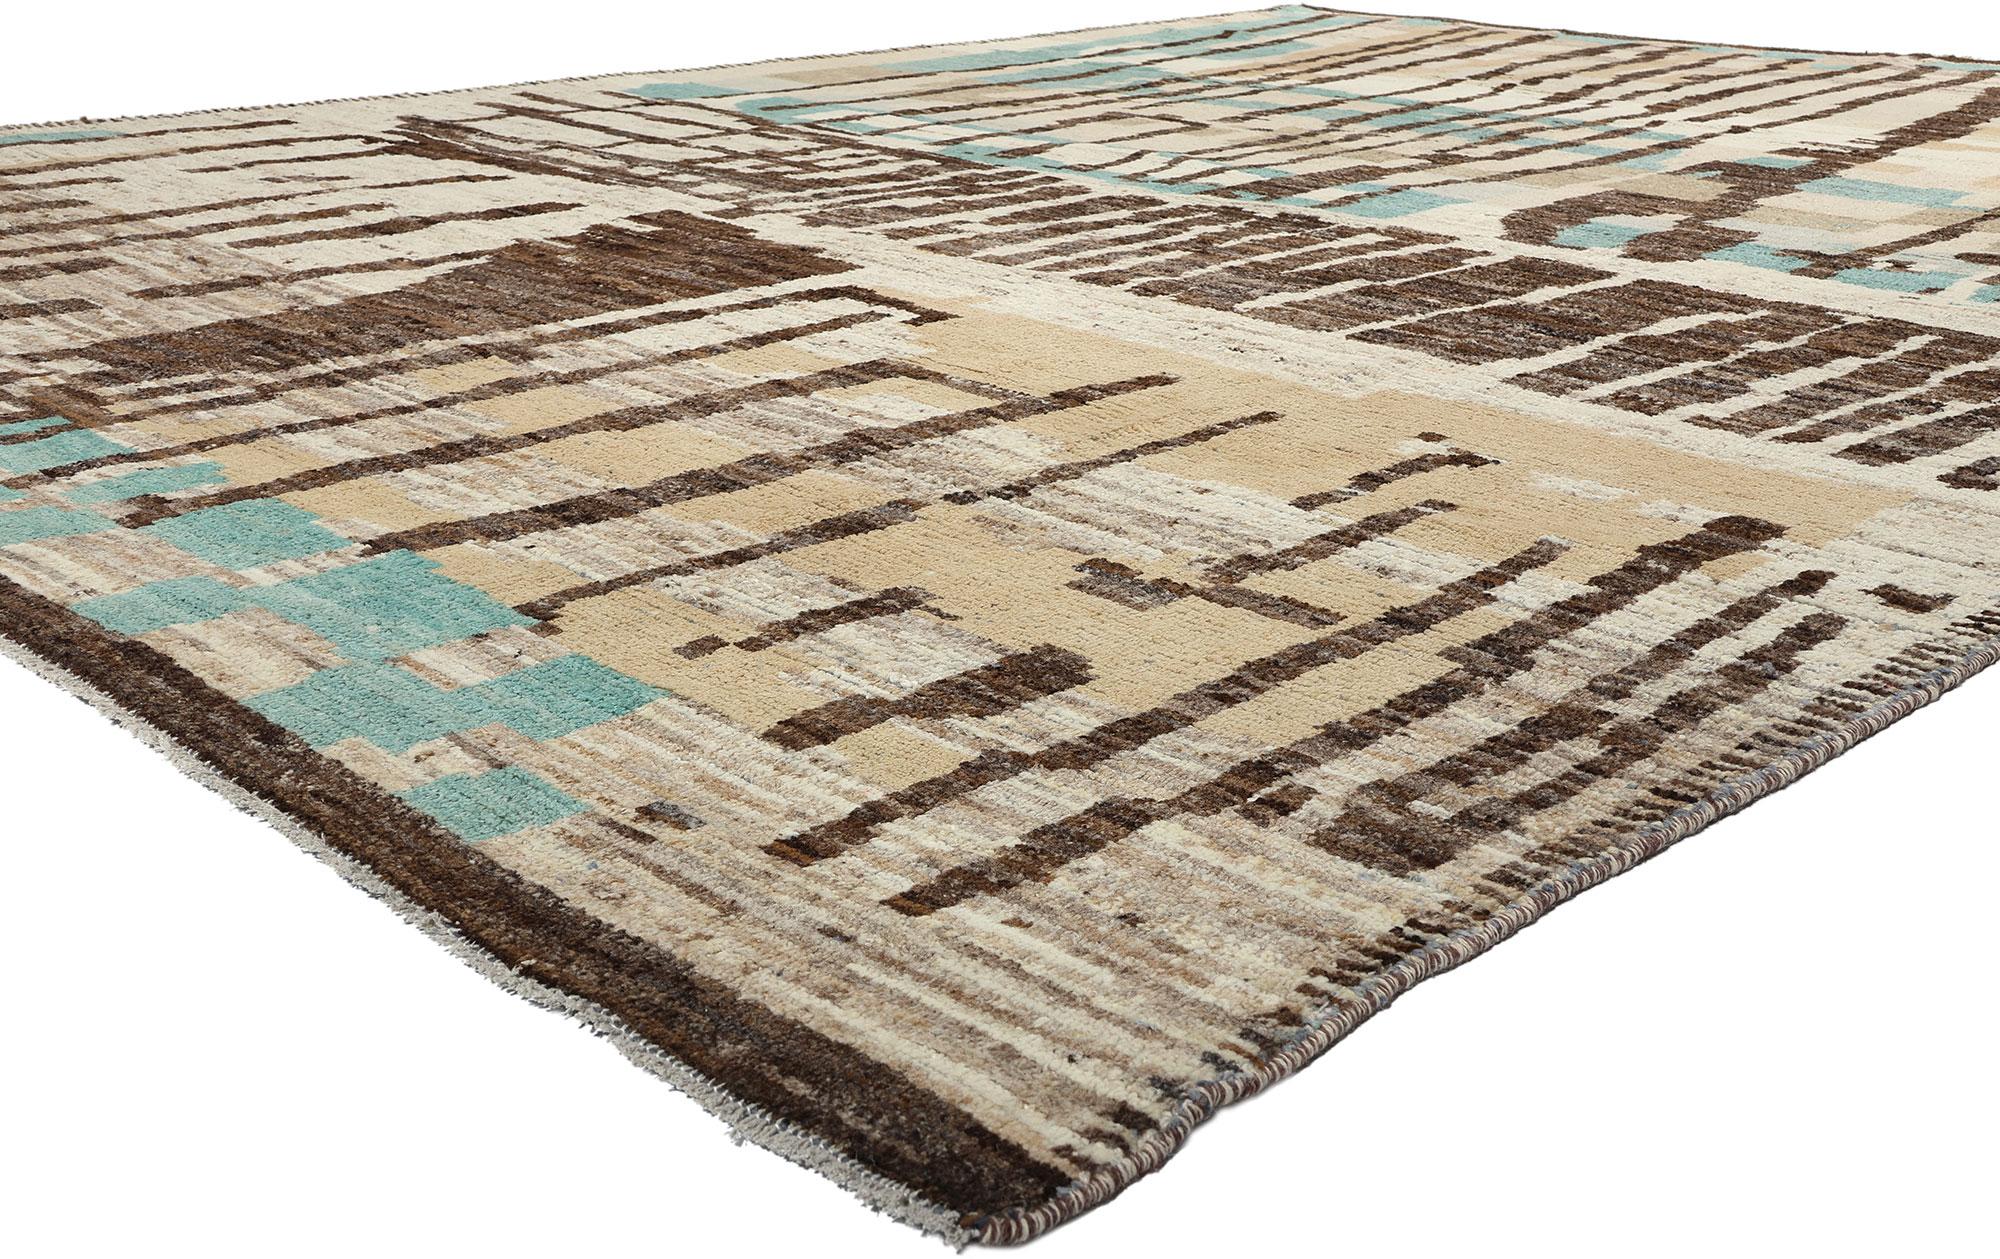 81064 Organic Modern Brutalist Moroccan Rug, 12'02 x 15'05. This hand knotted wool Organic Modern Moroccan rug seamlessly blends the bold essence of Brutalism with the expressive allure of Abstract Linear art, all while embracing the principles of